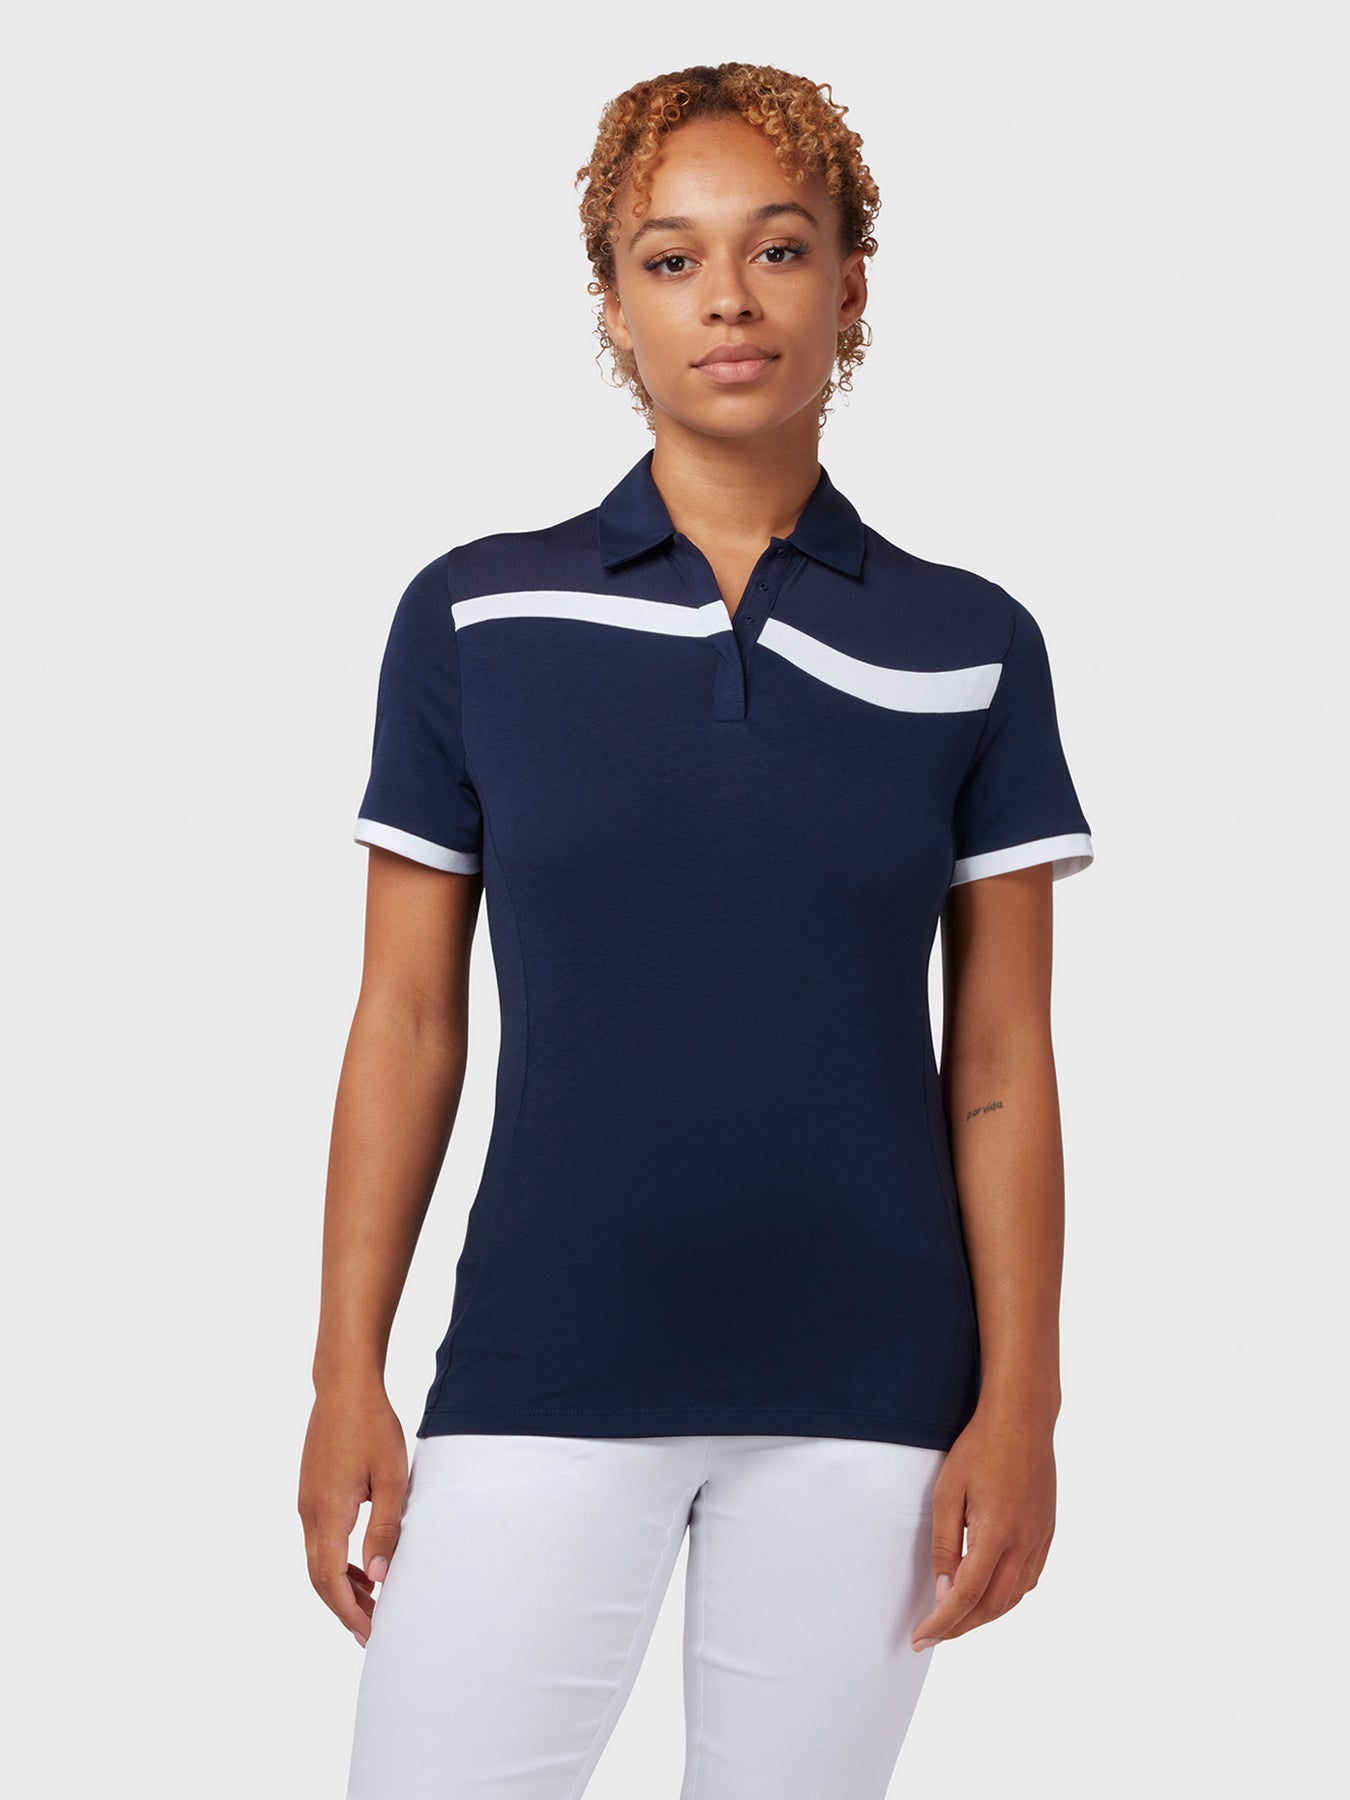 View Colour Block Womens Polo In Peacoat Peacoat M information